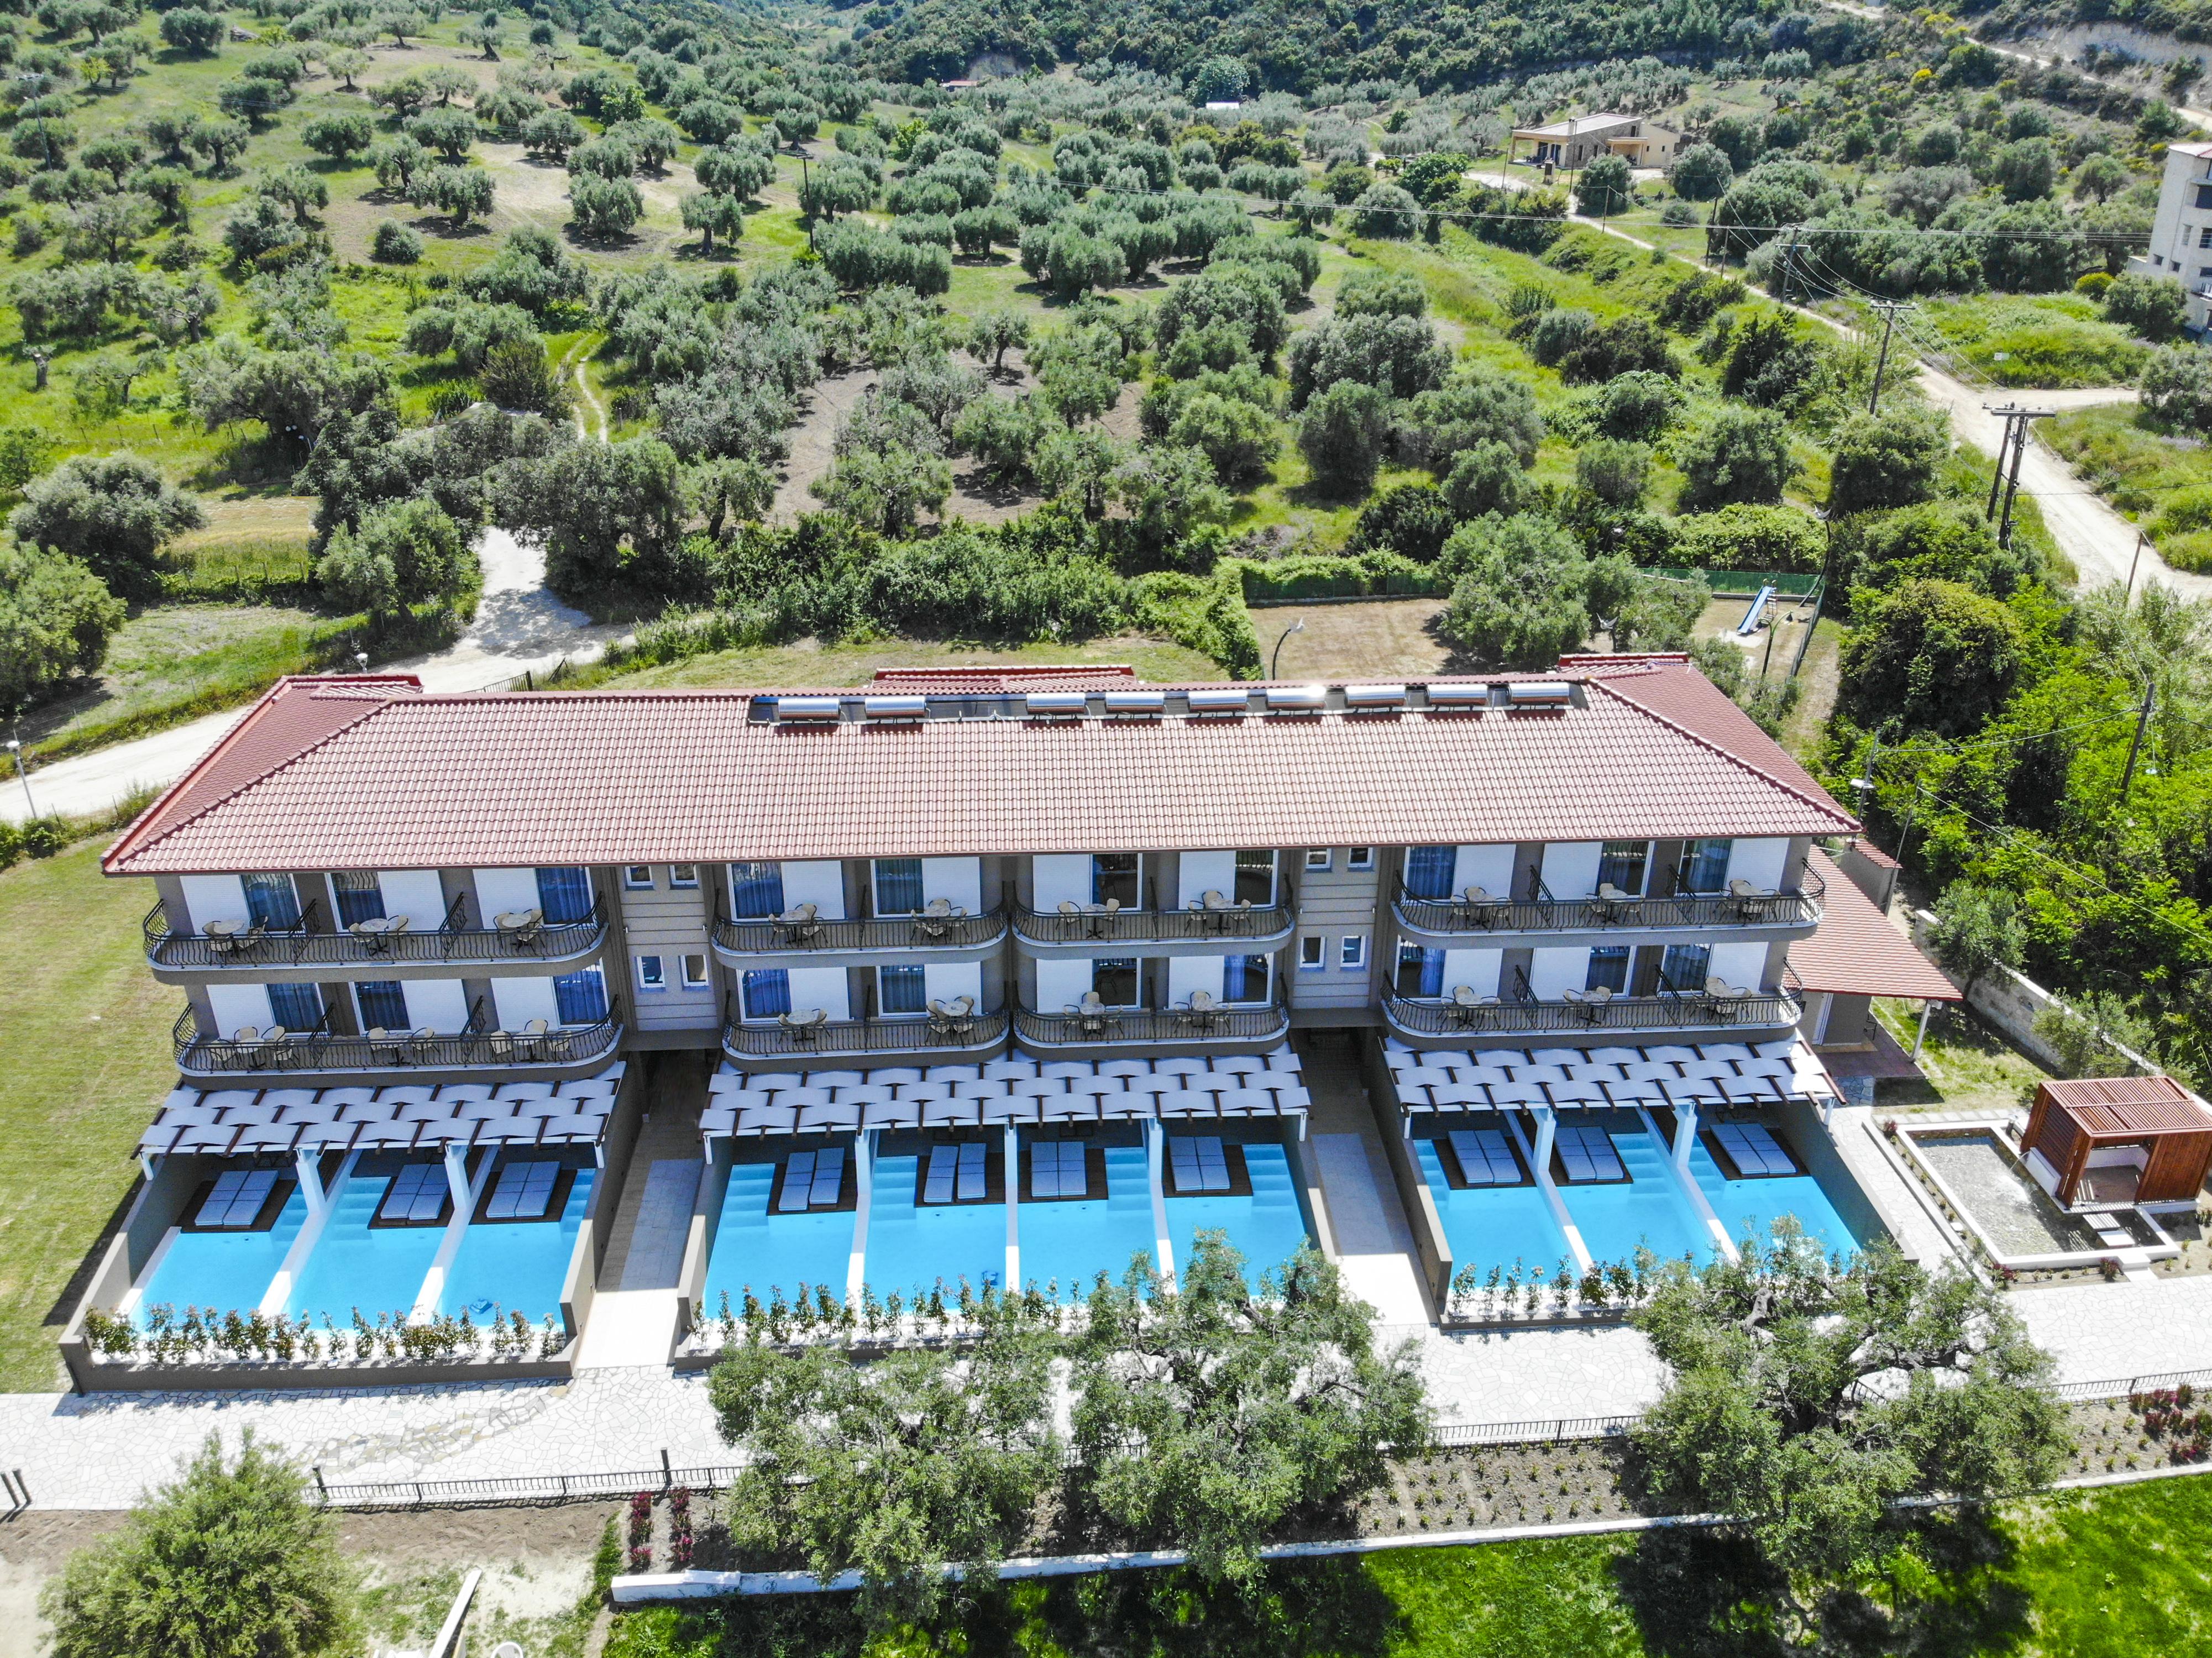 Royal Hotel And Suites Chalkidiki ภายนอก รูปภาพ